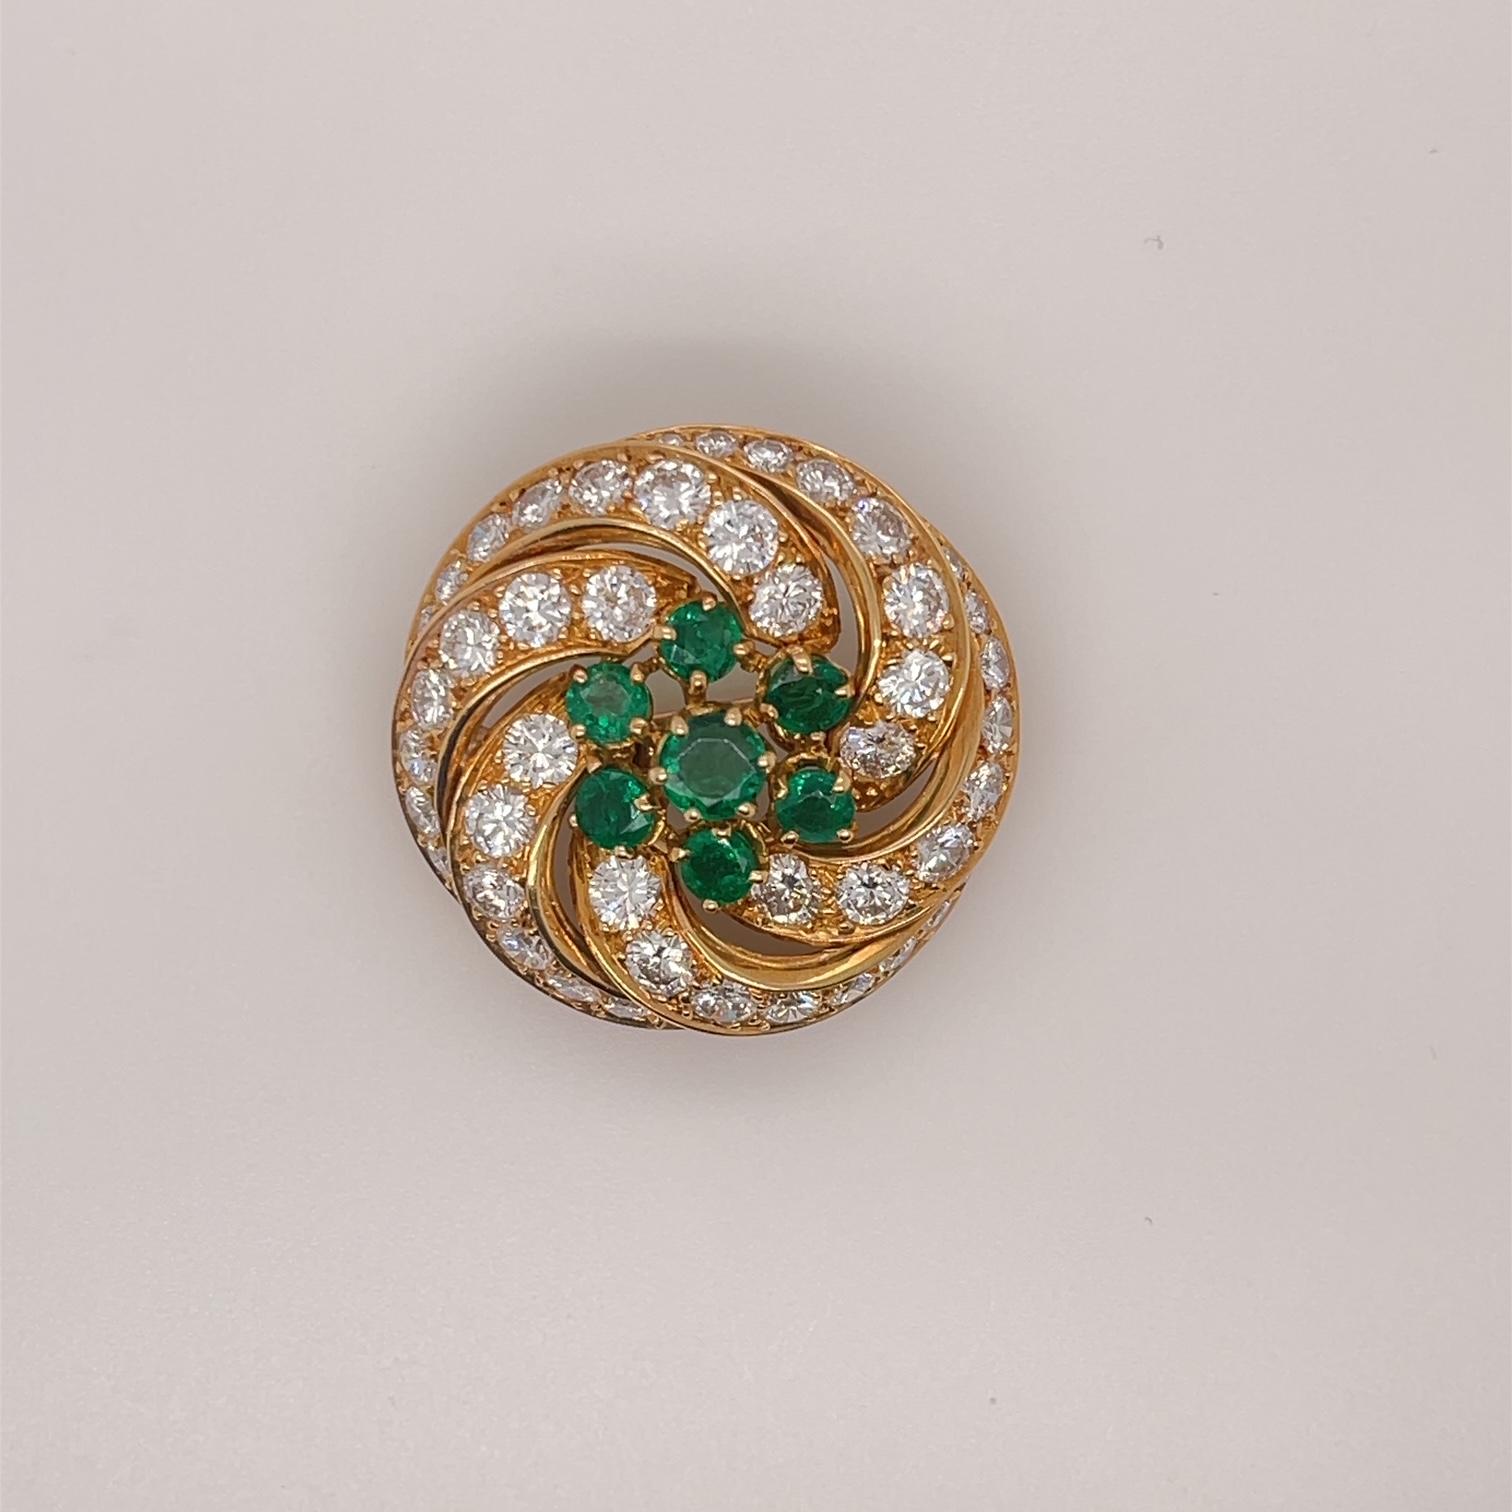 Vintage Round Spiral Diamond and Emerald 5.0 Carats Brooch 18K Yellow Gold

Total Carat Weight of Diamonds  4.0 carats

DE Color VVS Clarity

Total Carat Weight of Emerald 1.0 carat

Measurement 28.13mm

Set in 18K Yellow Gold

Stock#: J5880
